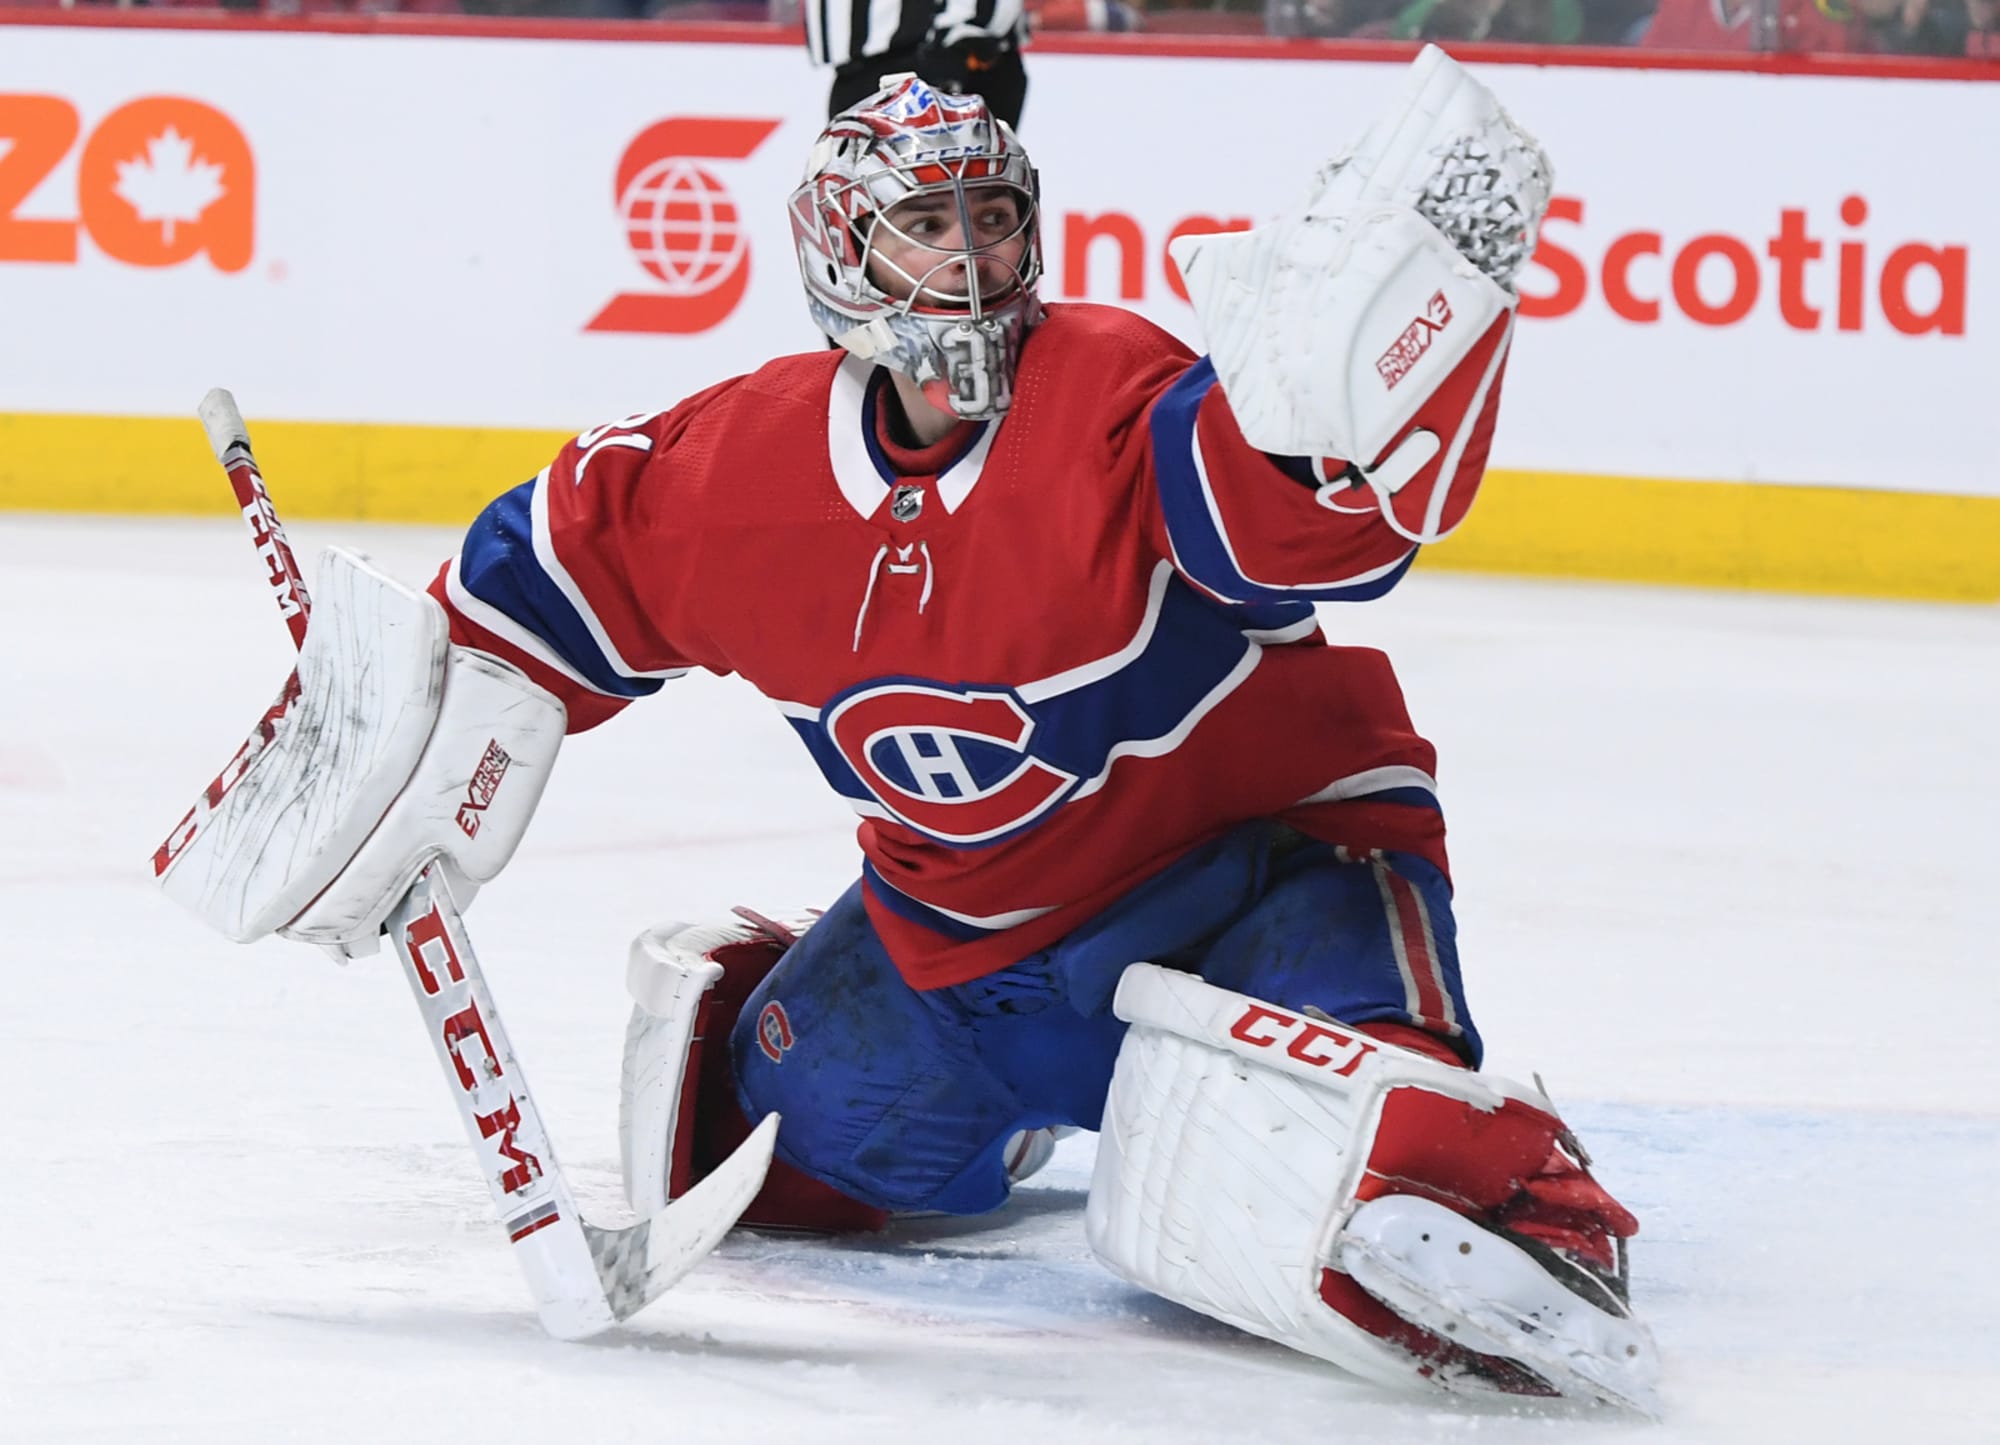 Carey Price, of Vancouver, B.C., receives his Montreal Canadiens